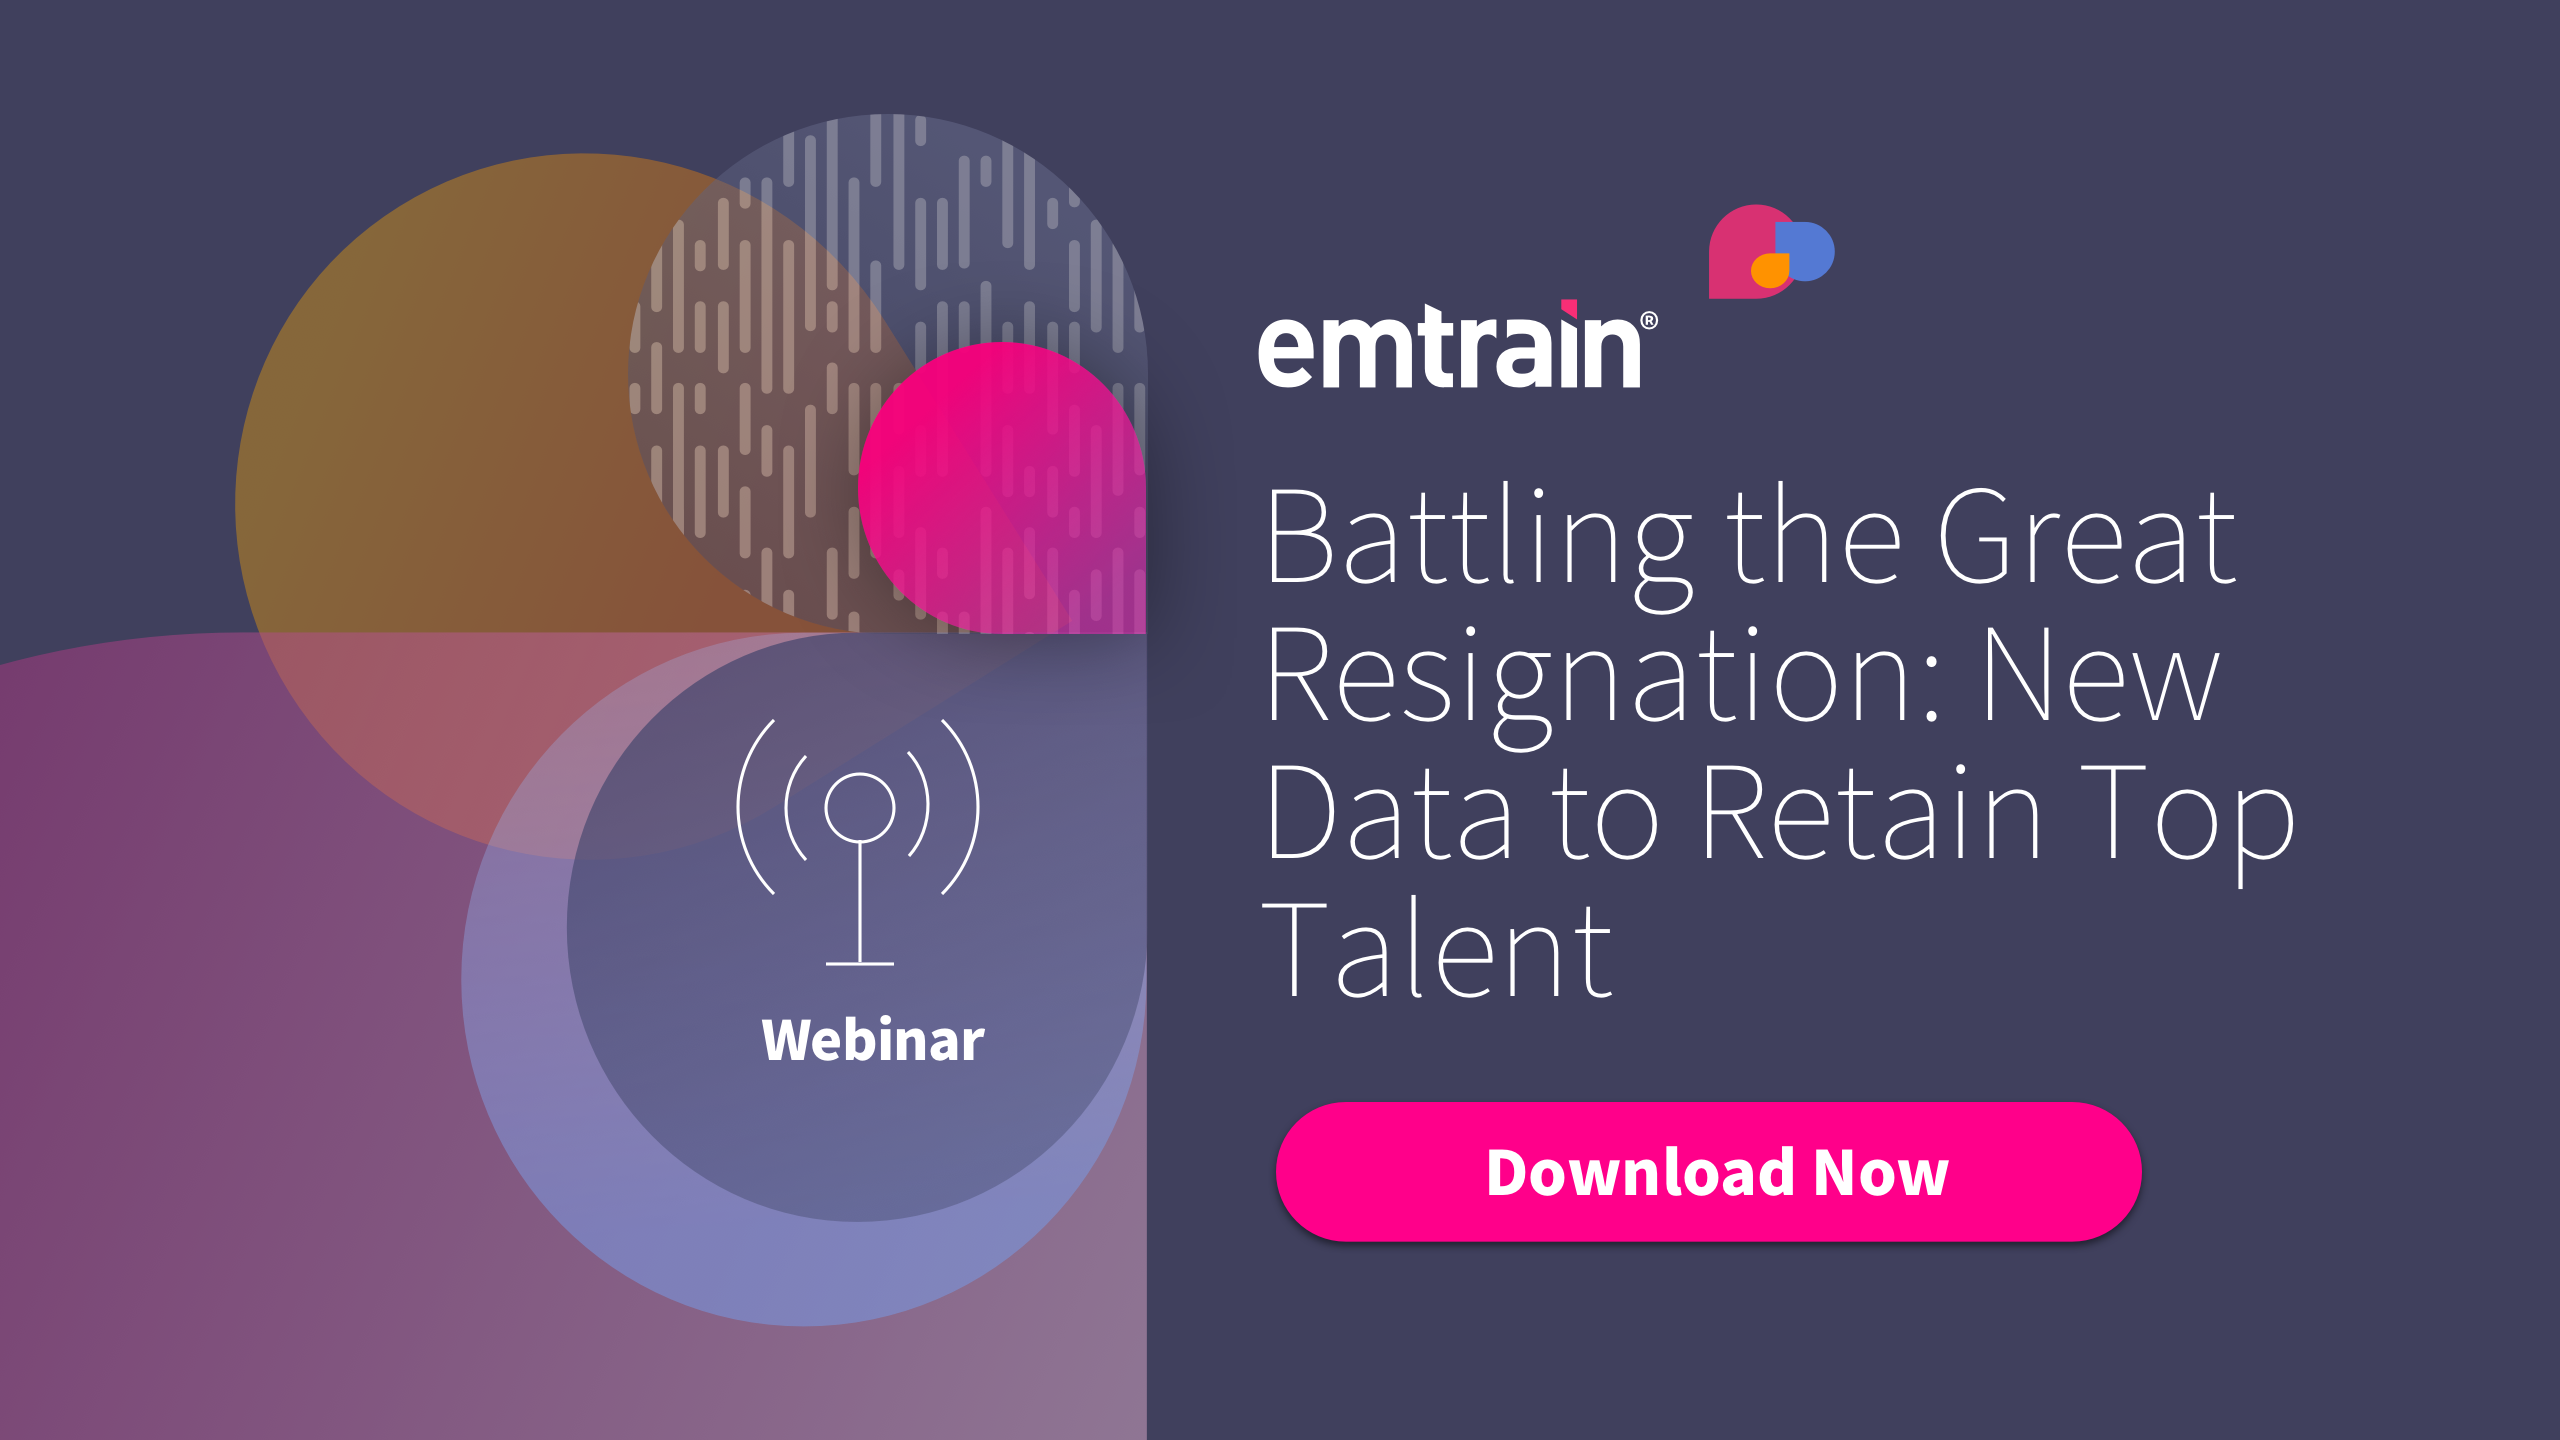 Battling the Great Resignation: New Data to Retain Top Talent